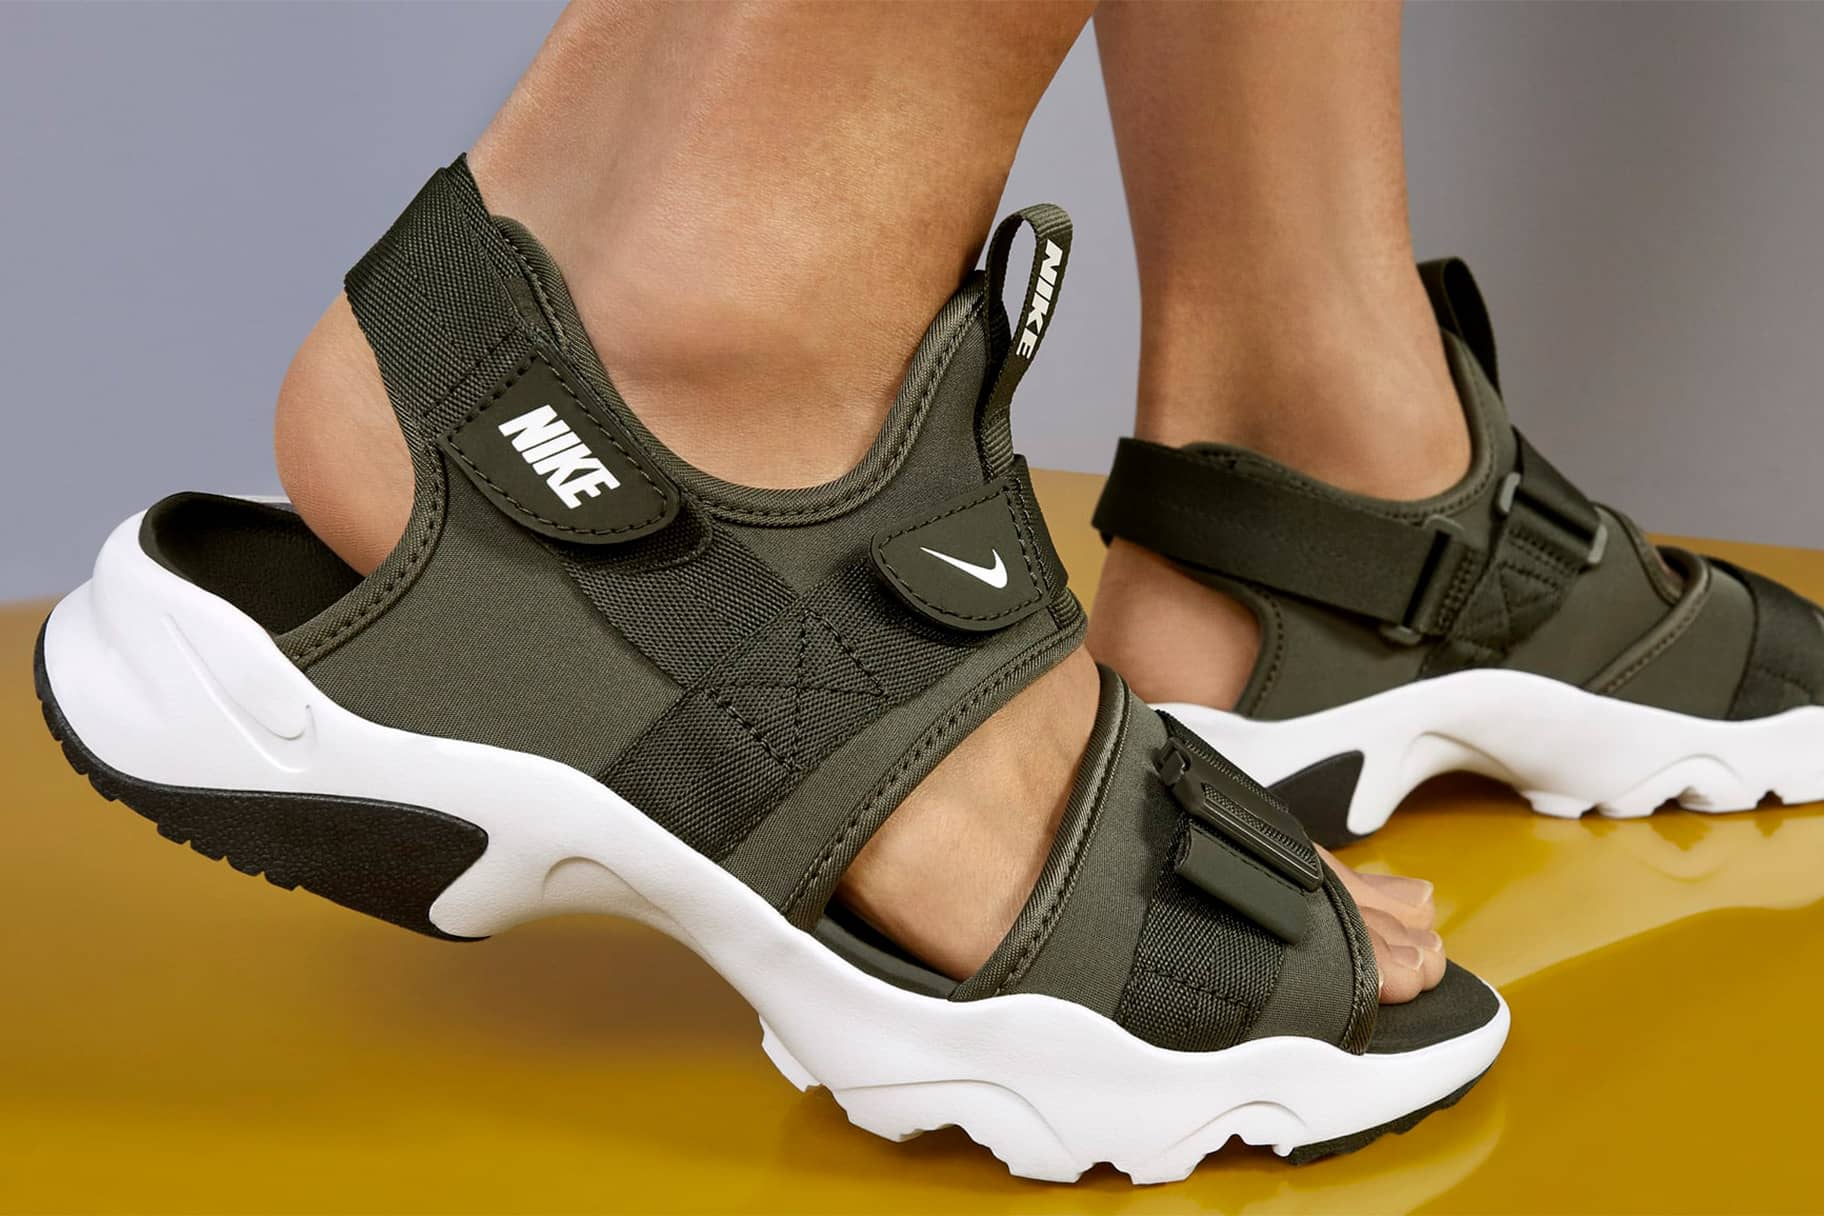 The Top Four Nike Sandals For Walking